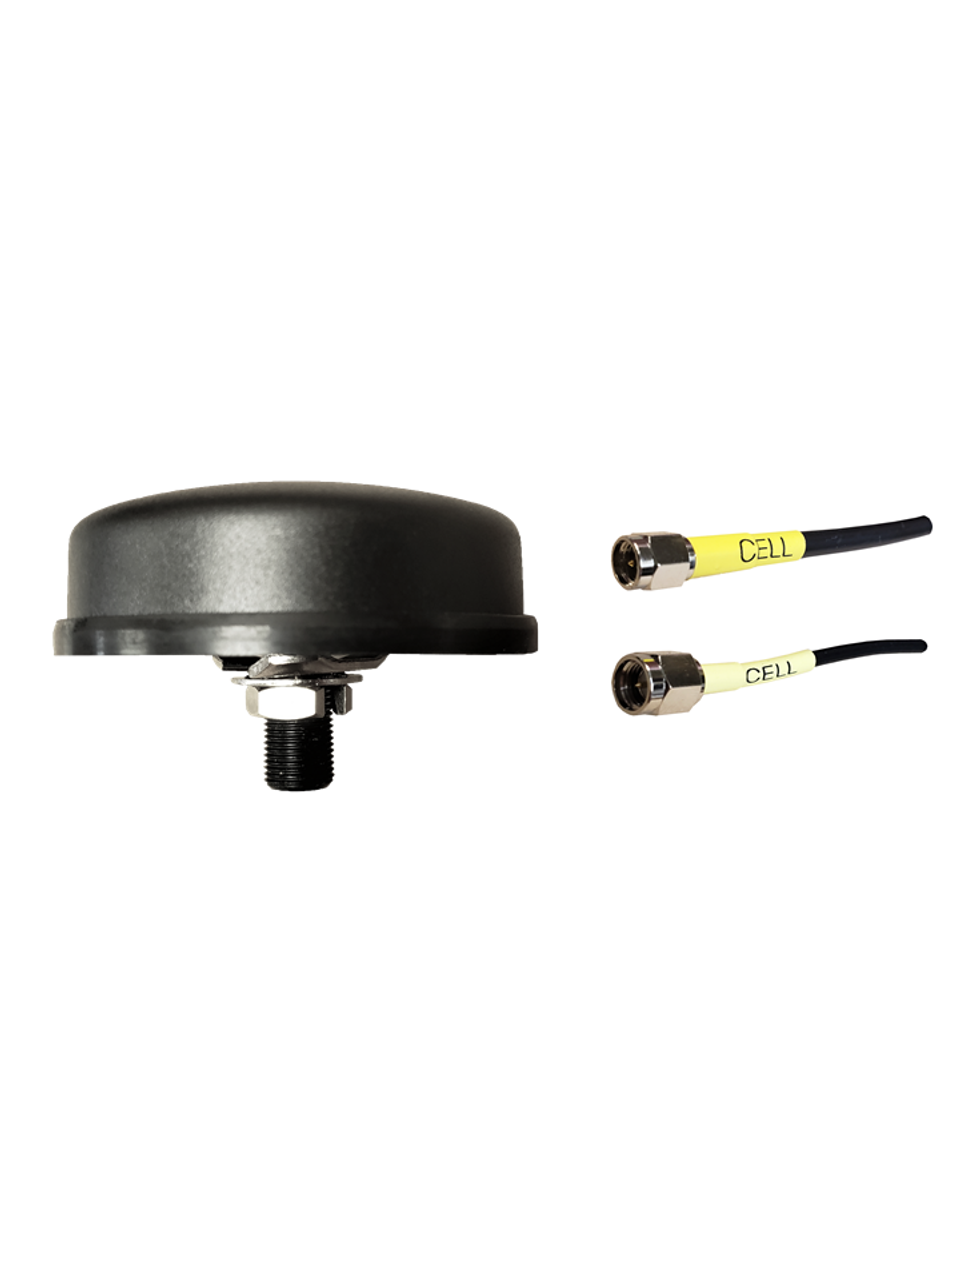 M400 2-Lead MIMO Cellular 3G 4G 5G LTE Bolt Mount M2M IoT Antenna for Inseego SKYUS-500V Gateway